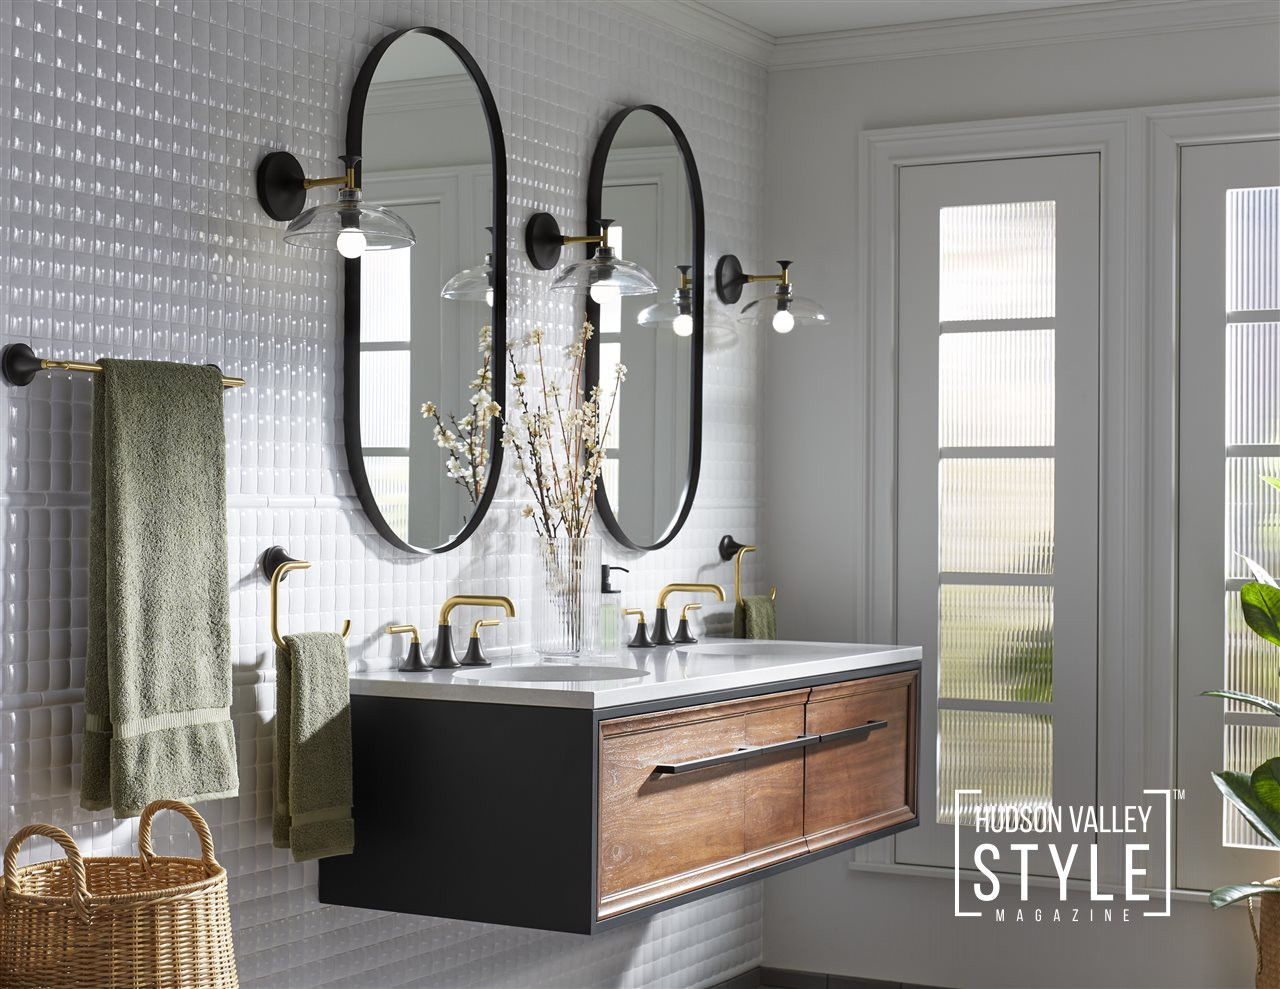 Bathroom Design: How to make elevated design choices through delightful details